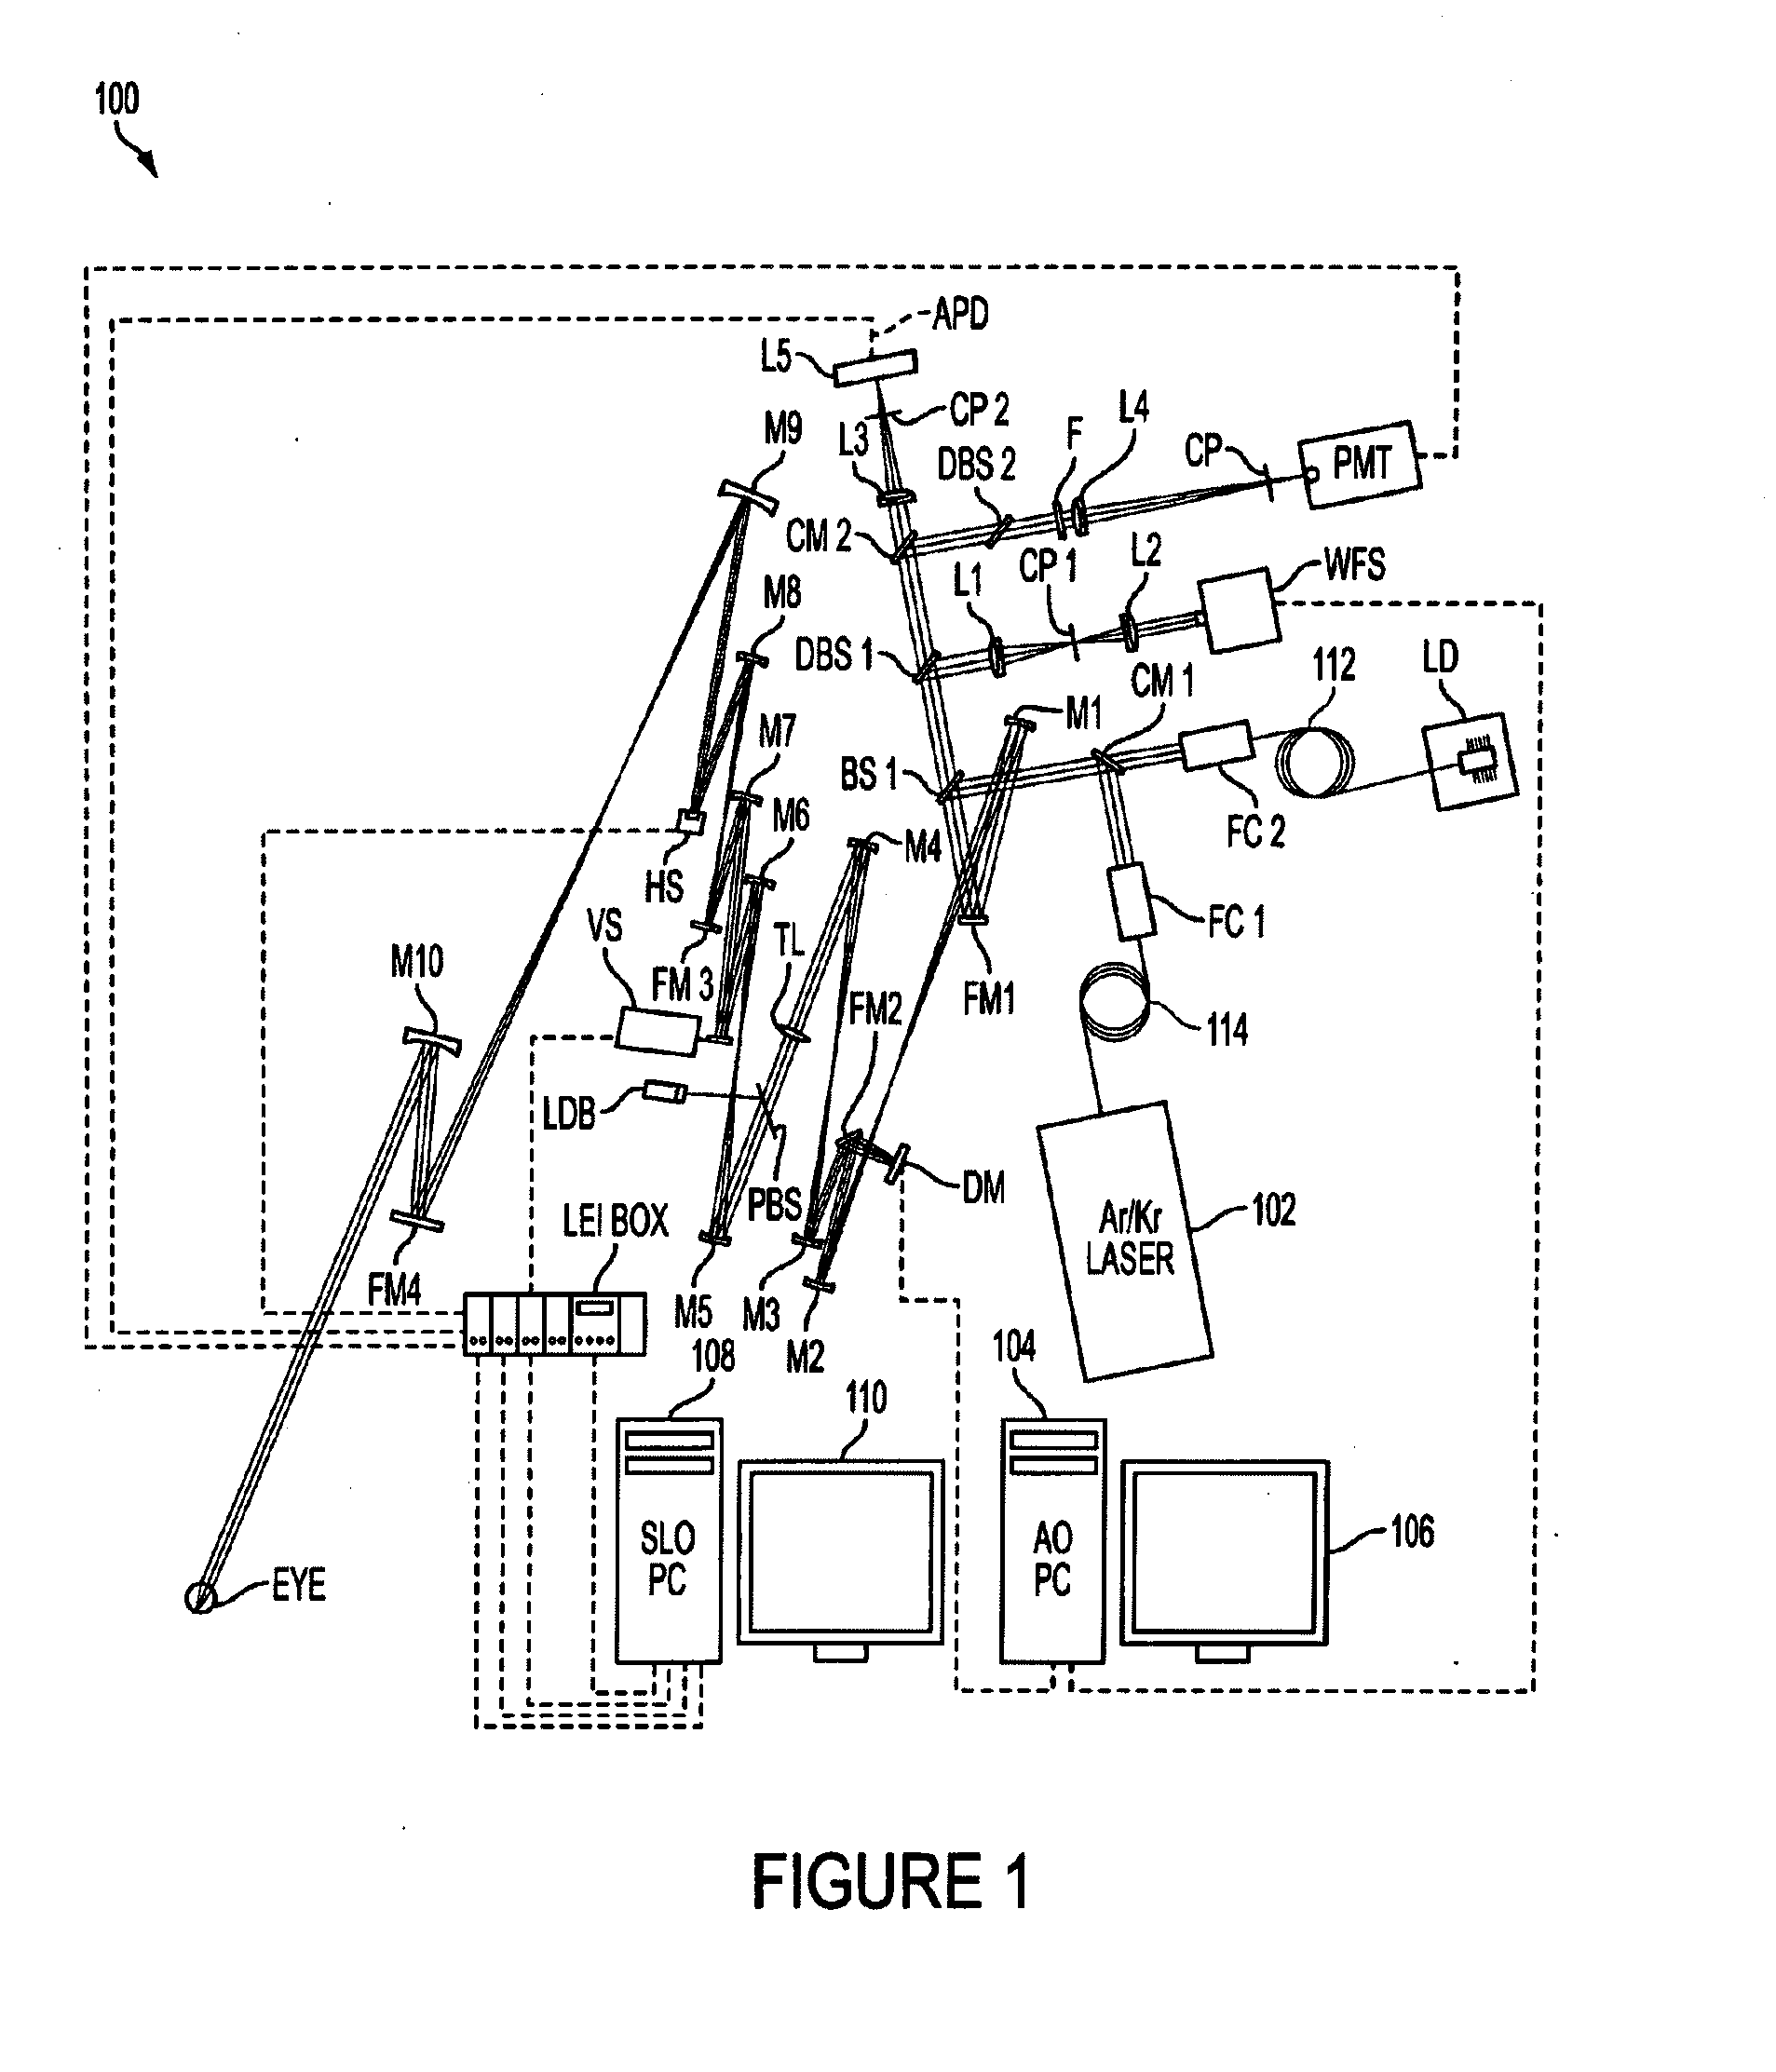 Method and apparatus for imaging in an eye